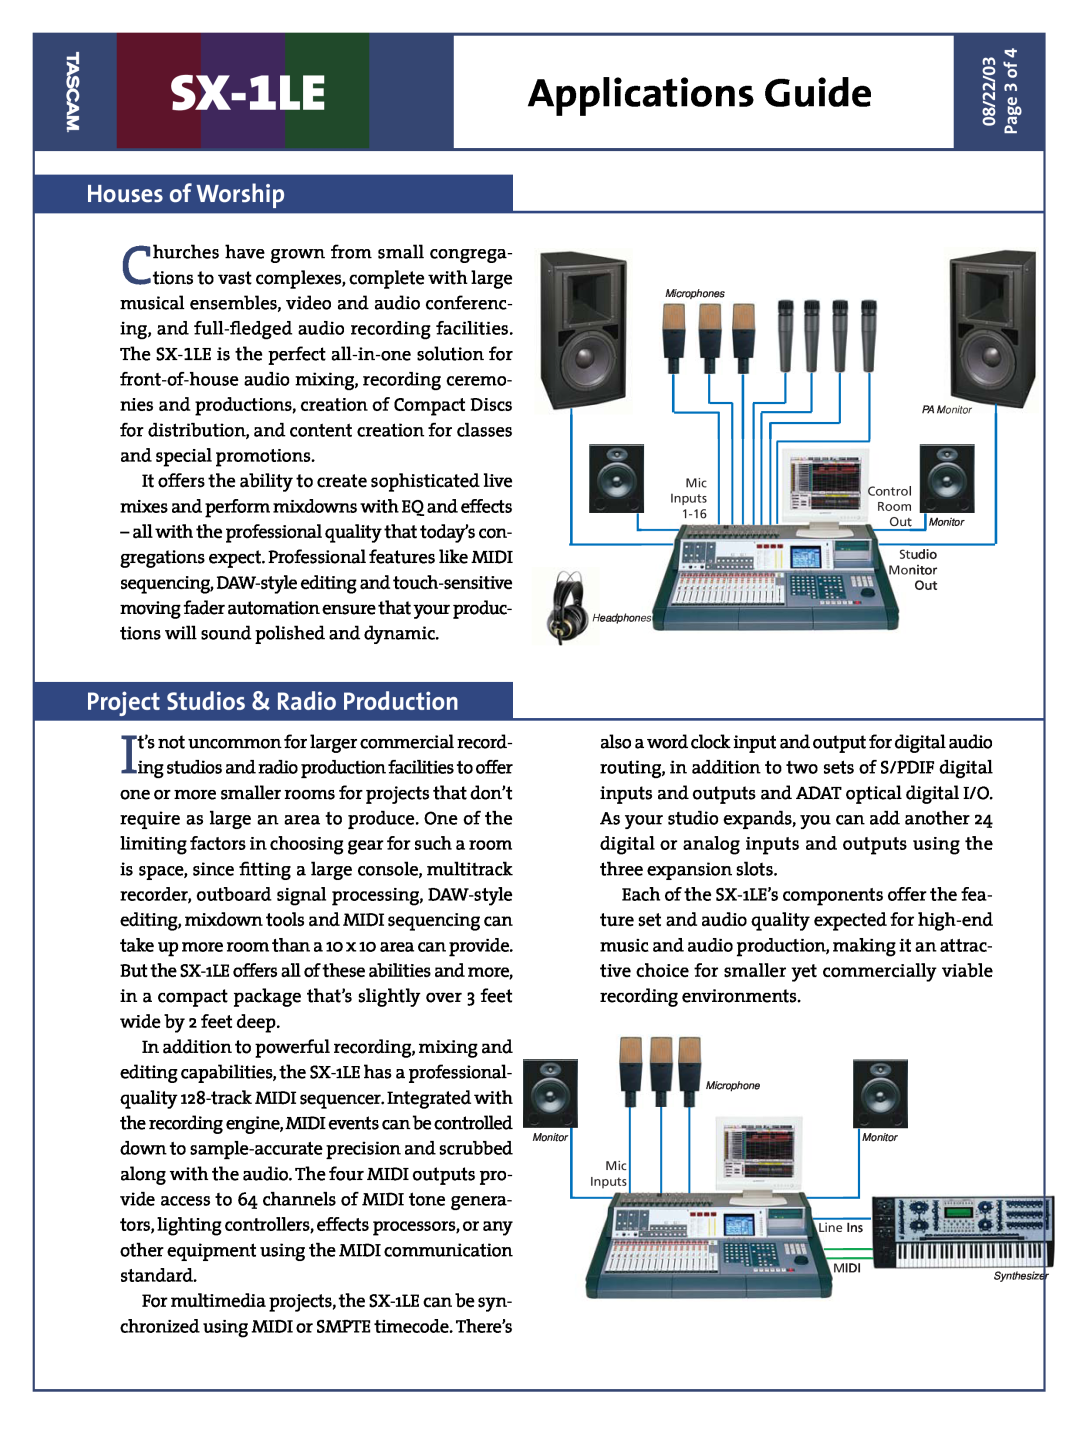 Tascam SX-1LE dimensions Houses of Worship, Project Studios & Radio Production, Applications Guide 